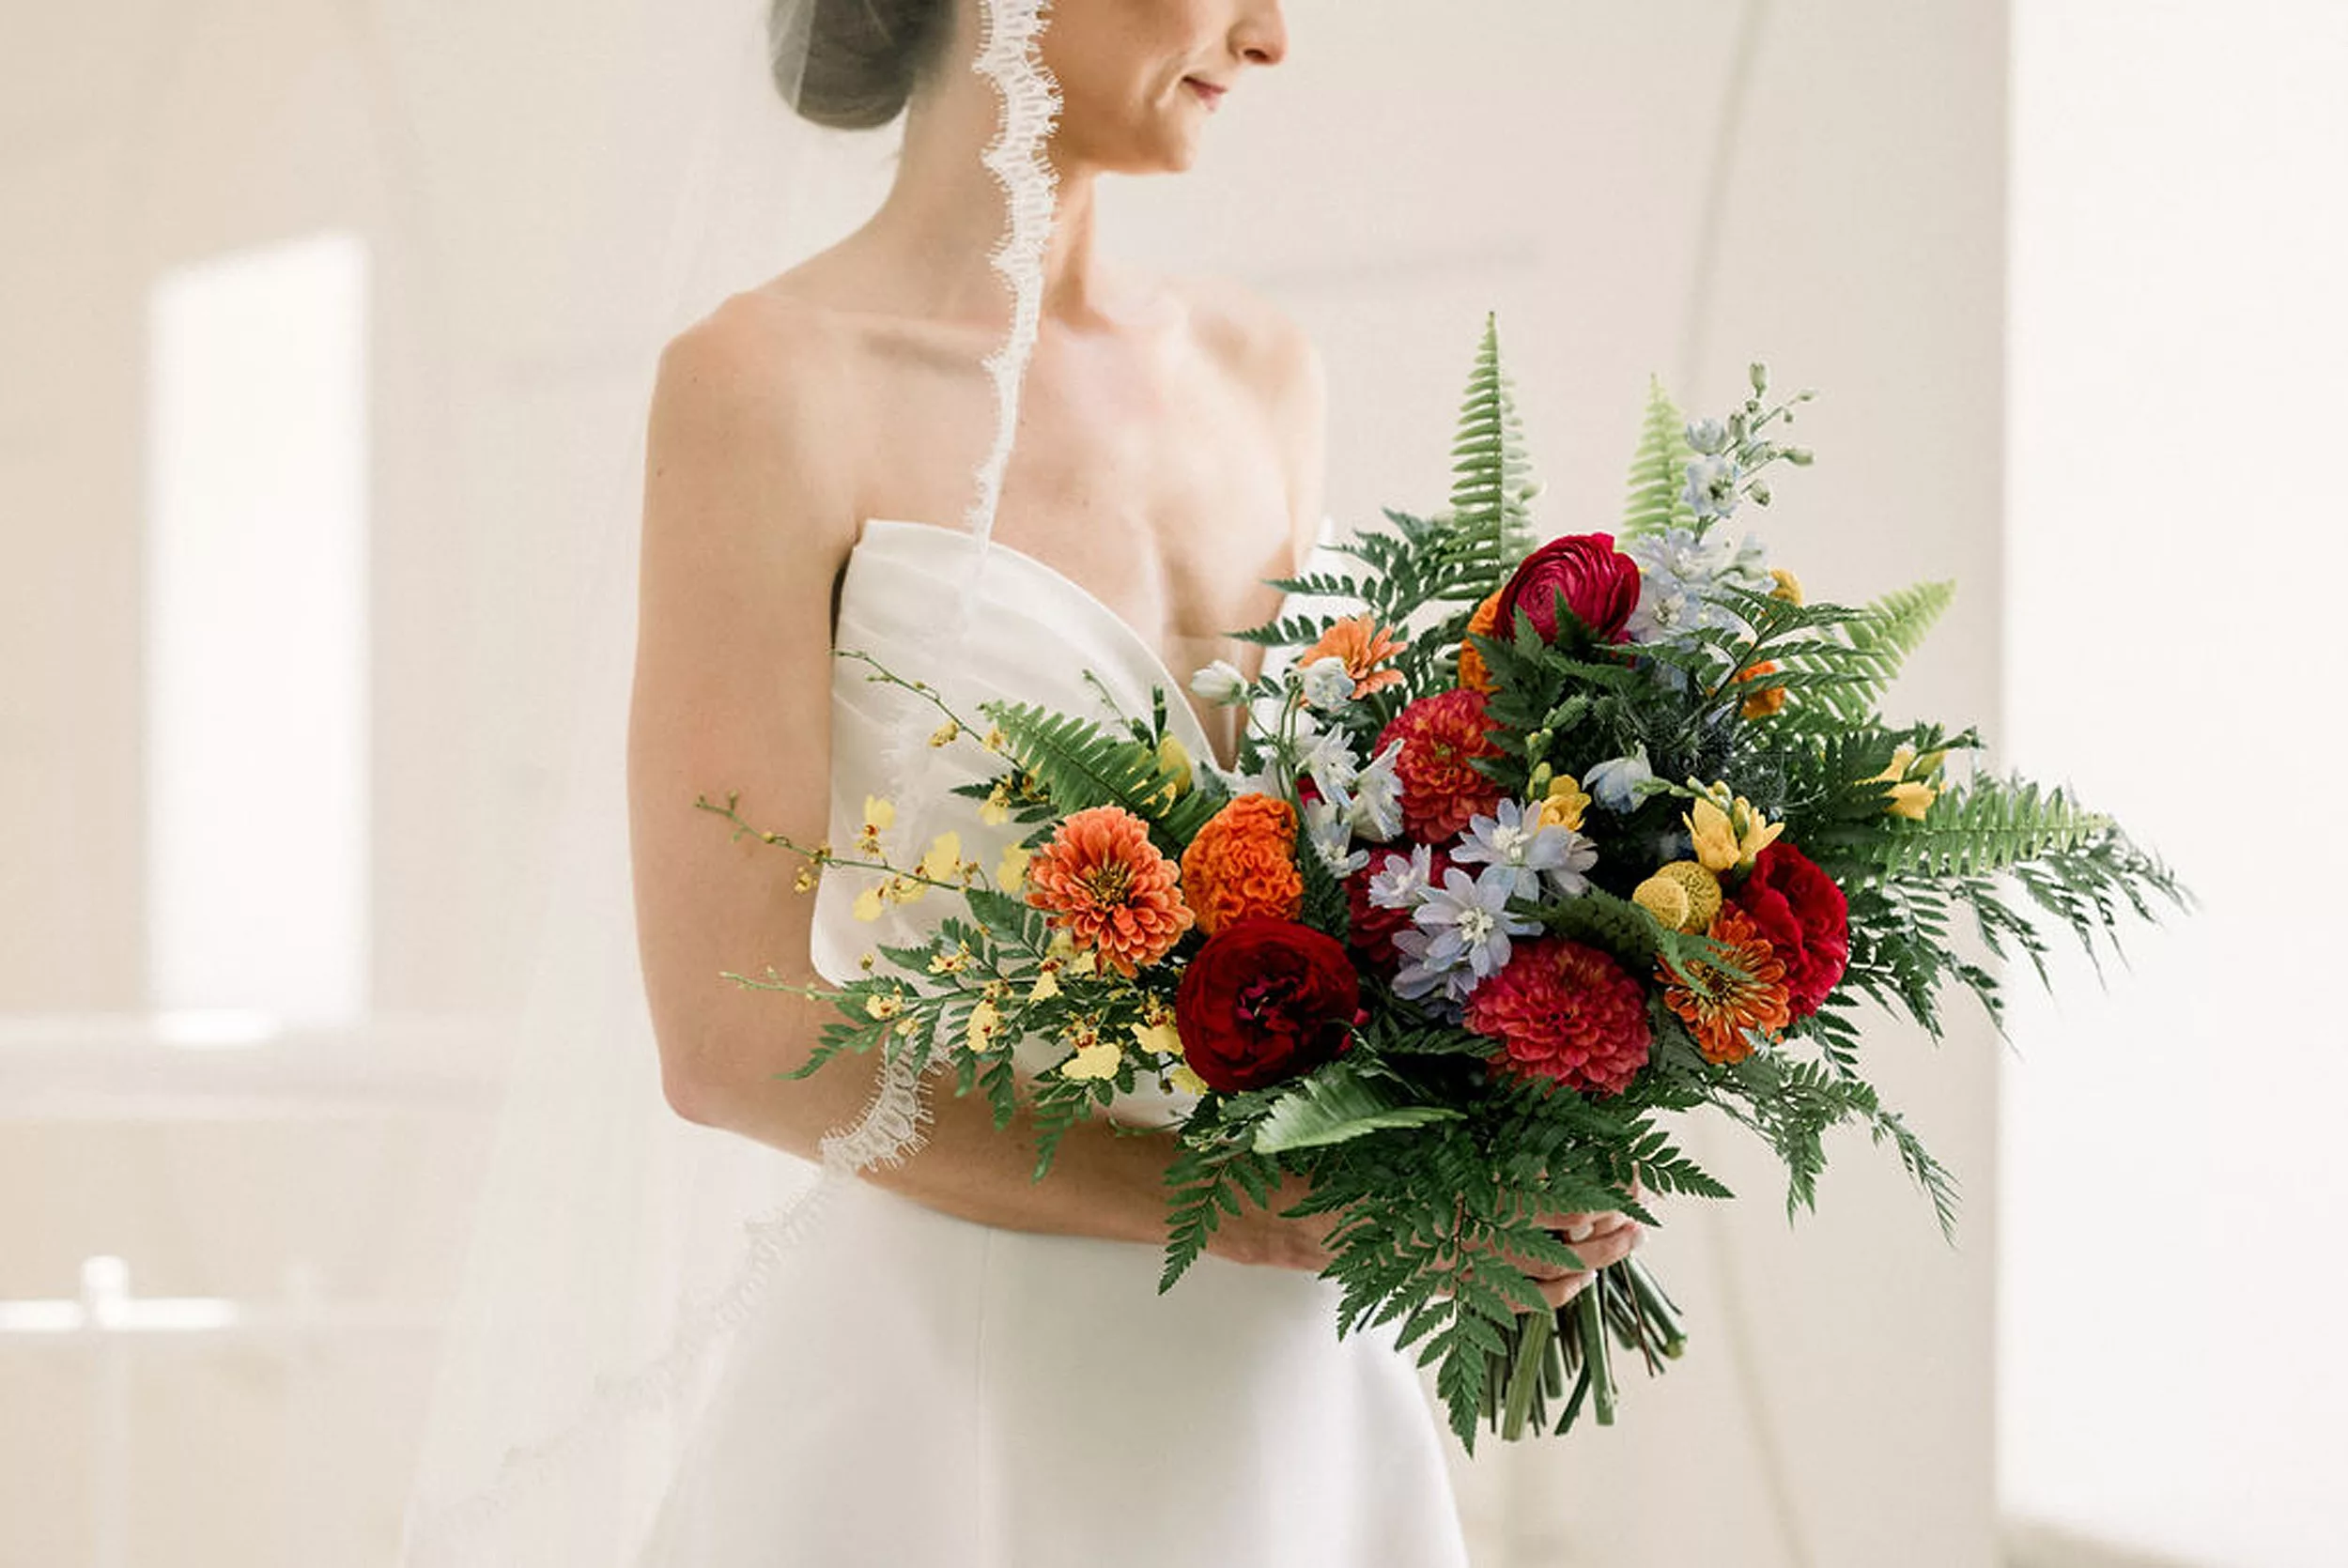 A bride stands in a window in a silk dress holding a bouquet of ferns and colorful flowers